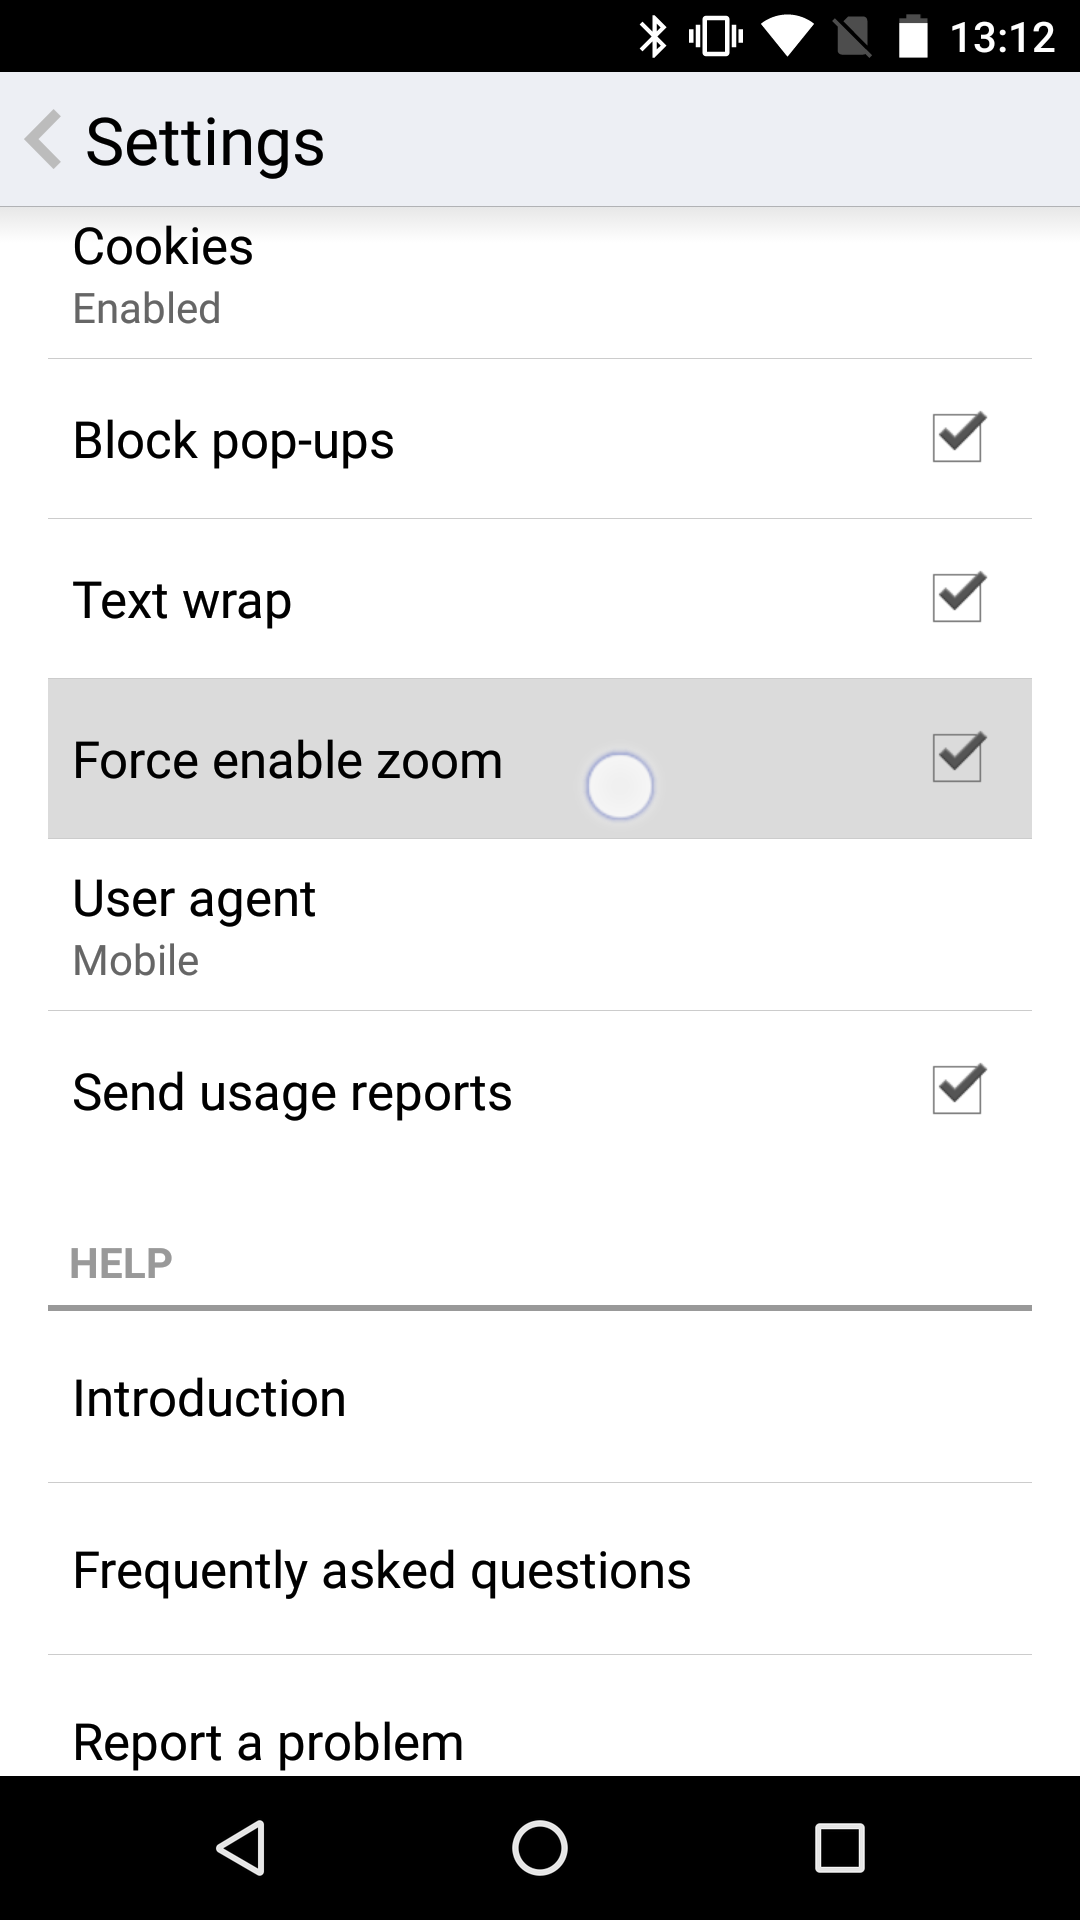 Opera/Android's 'Force enable zoom' setting